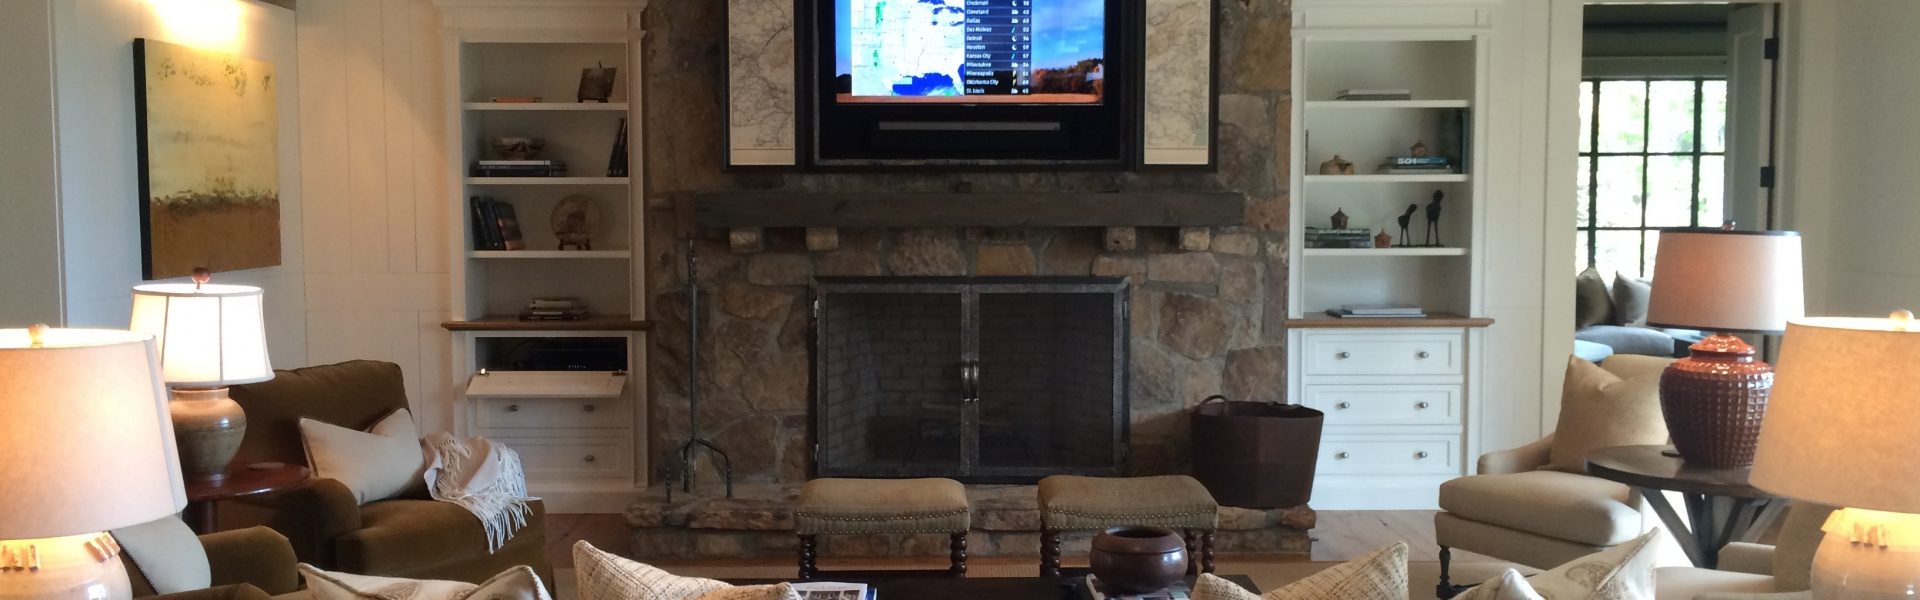 Smart home installation by @Home Audio Video Technology for Knoxville